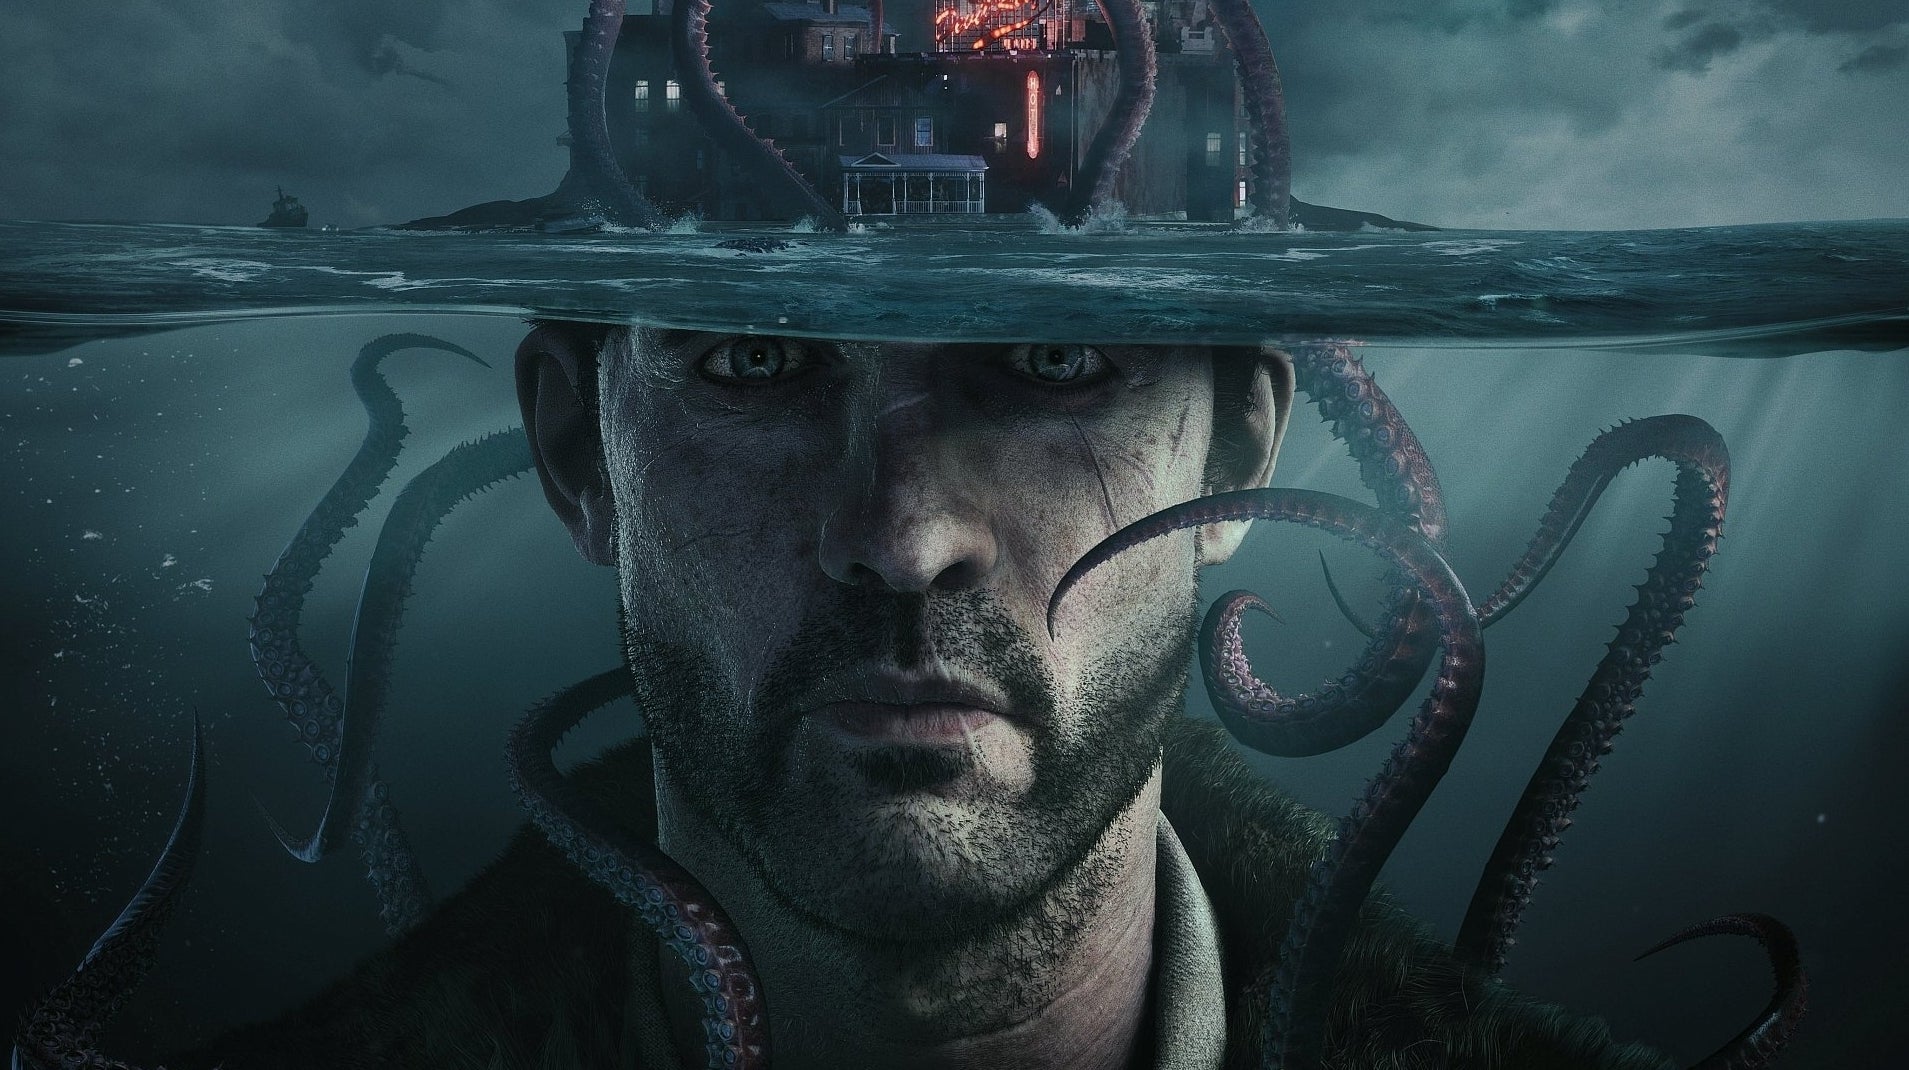 Image for The Sinking City review - a lacklustre whodunit unable to fulfil lofty ambitions